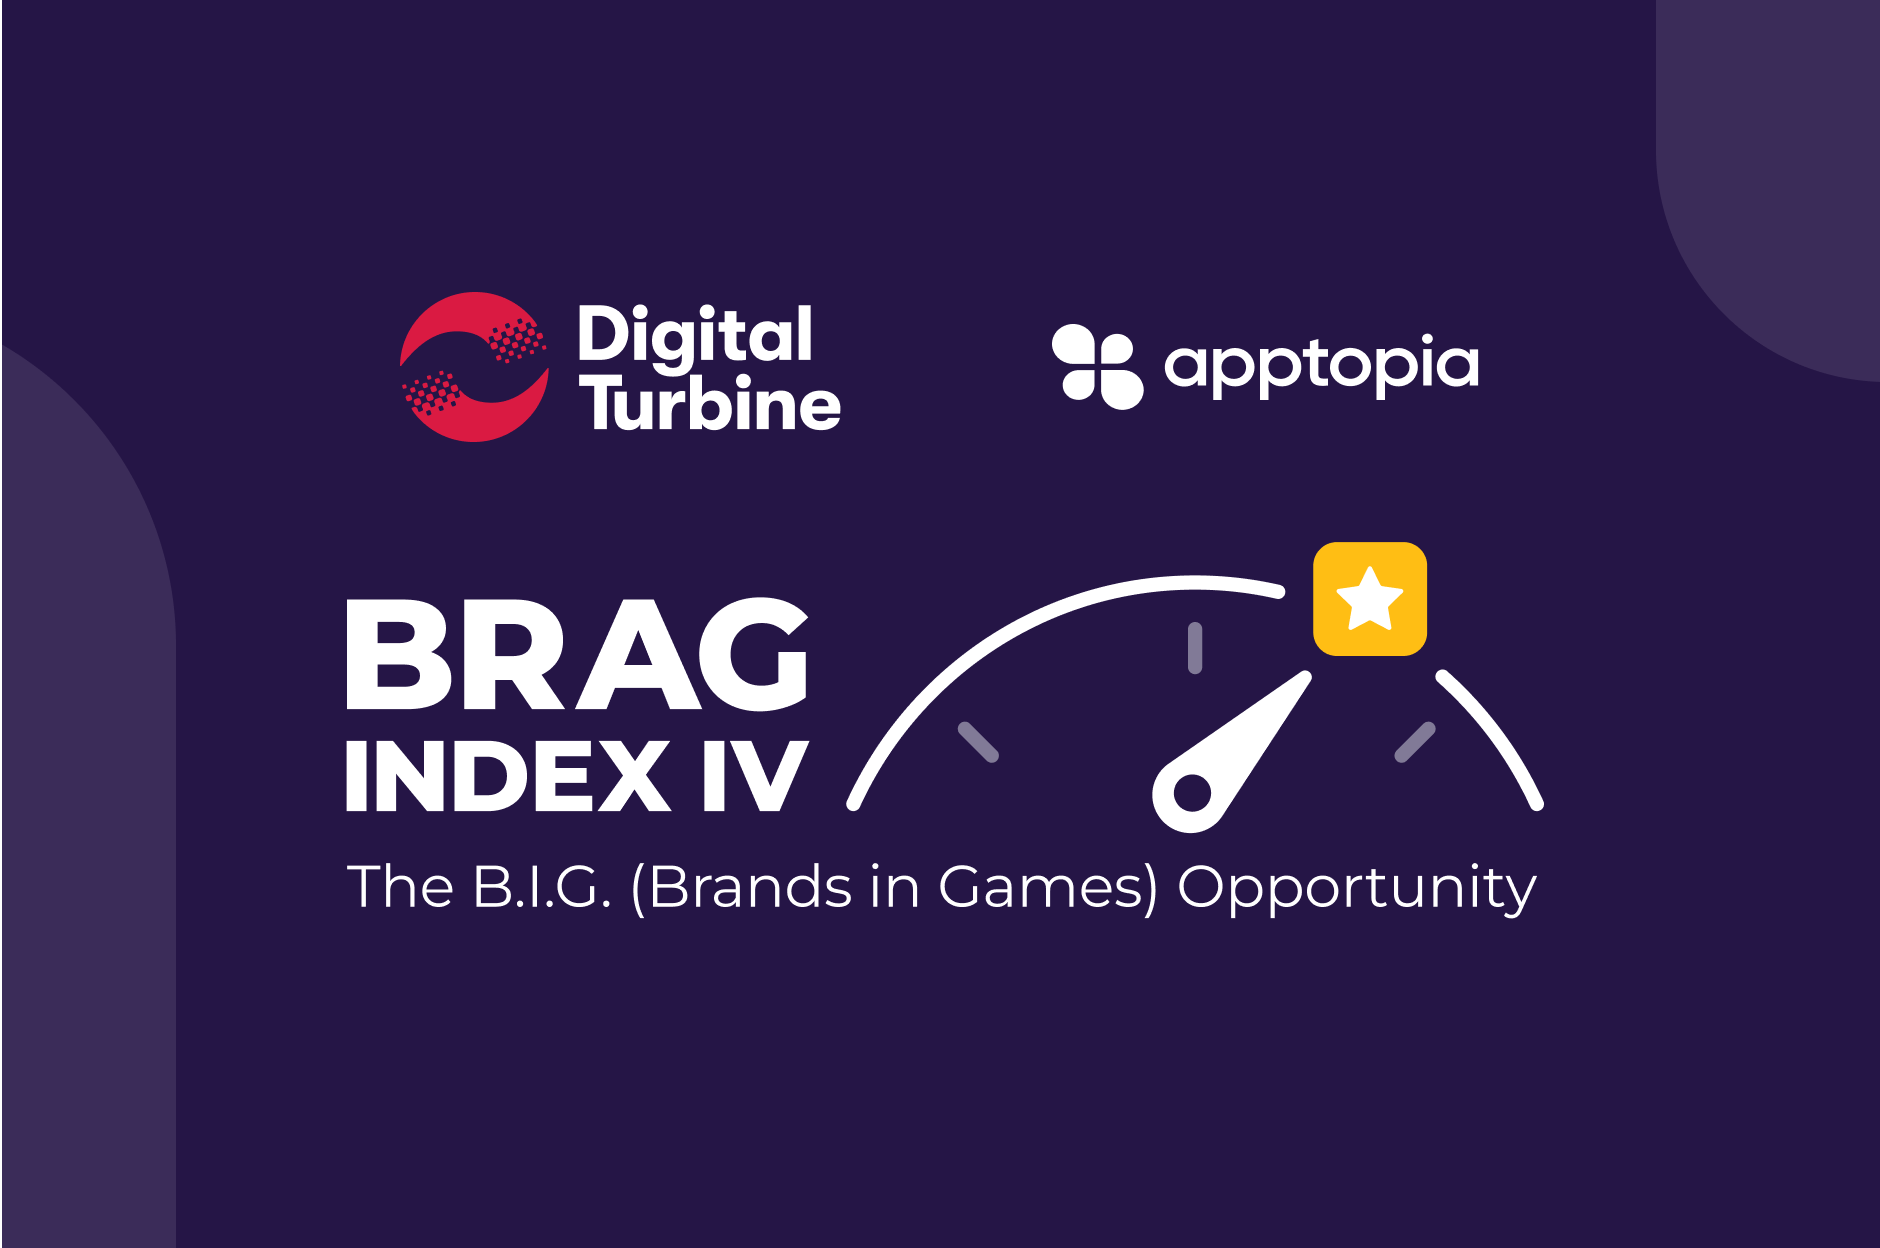 The B.I.G. (Brands In Games) Opportunity